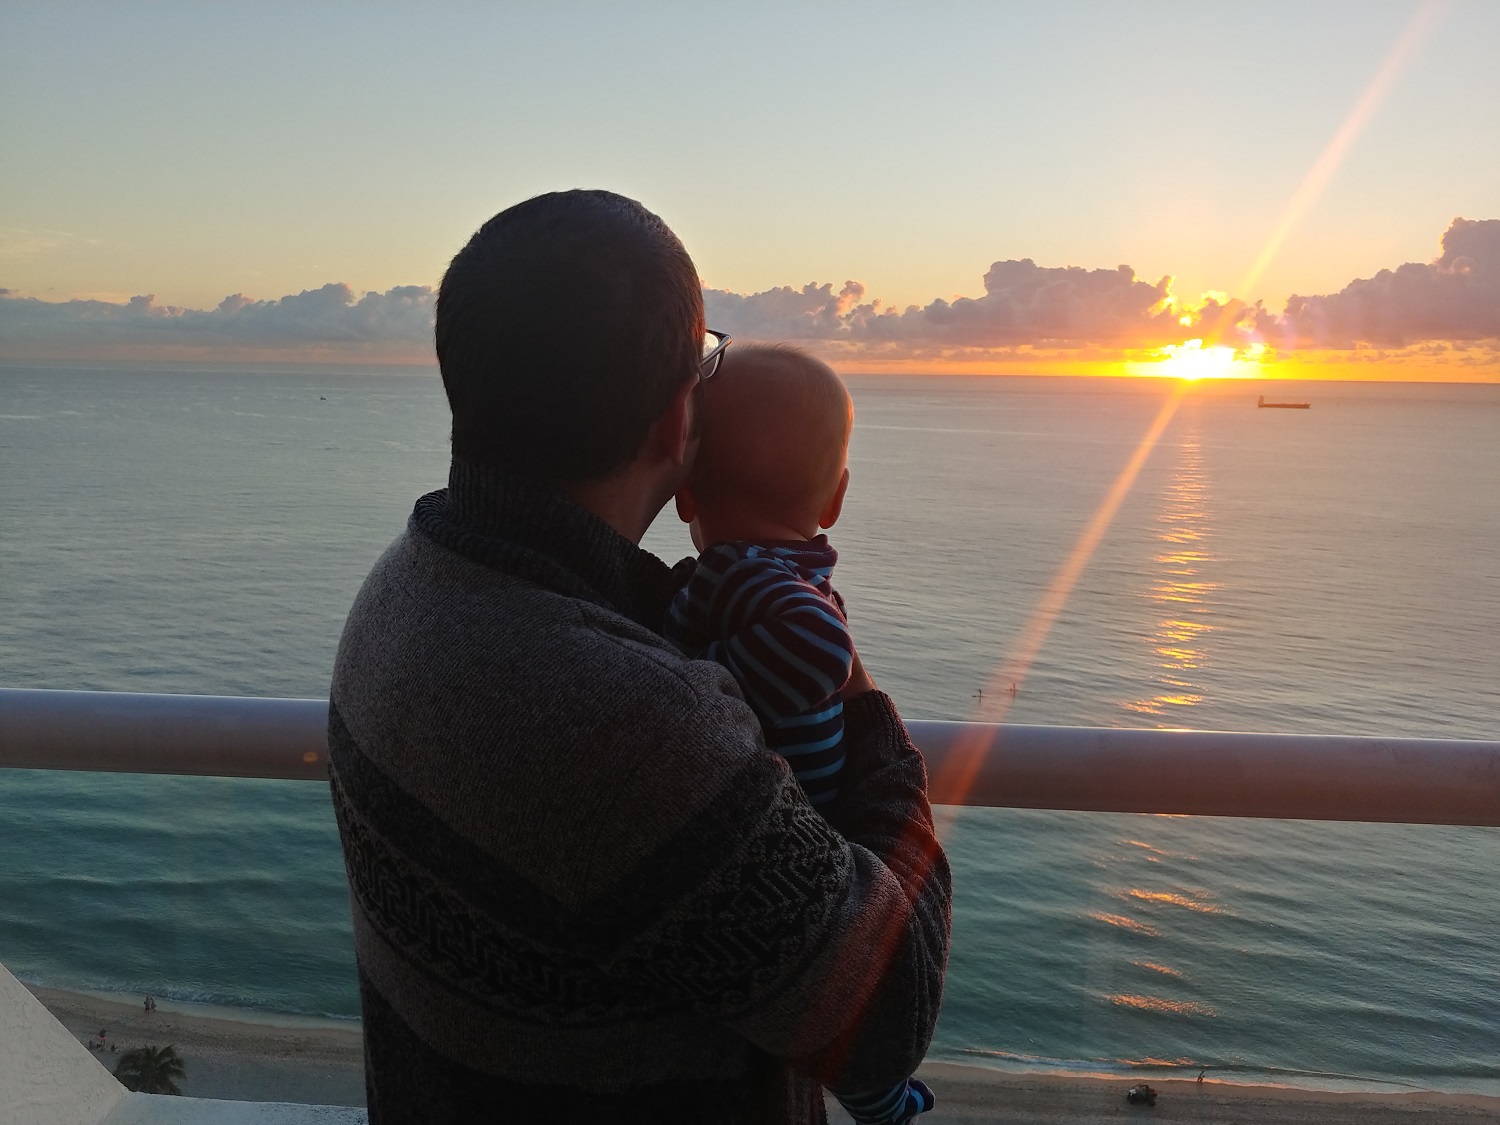 a man holding a baby by a railing overlooking the ocean